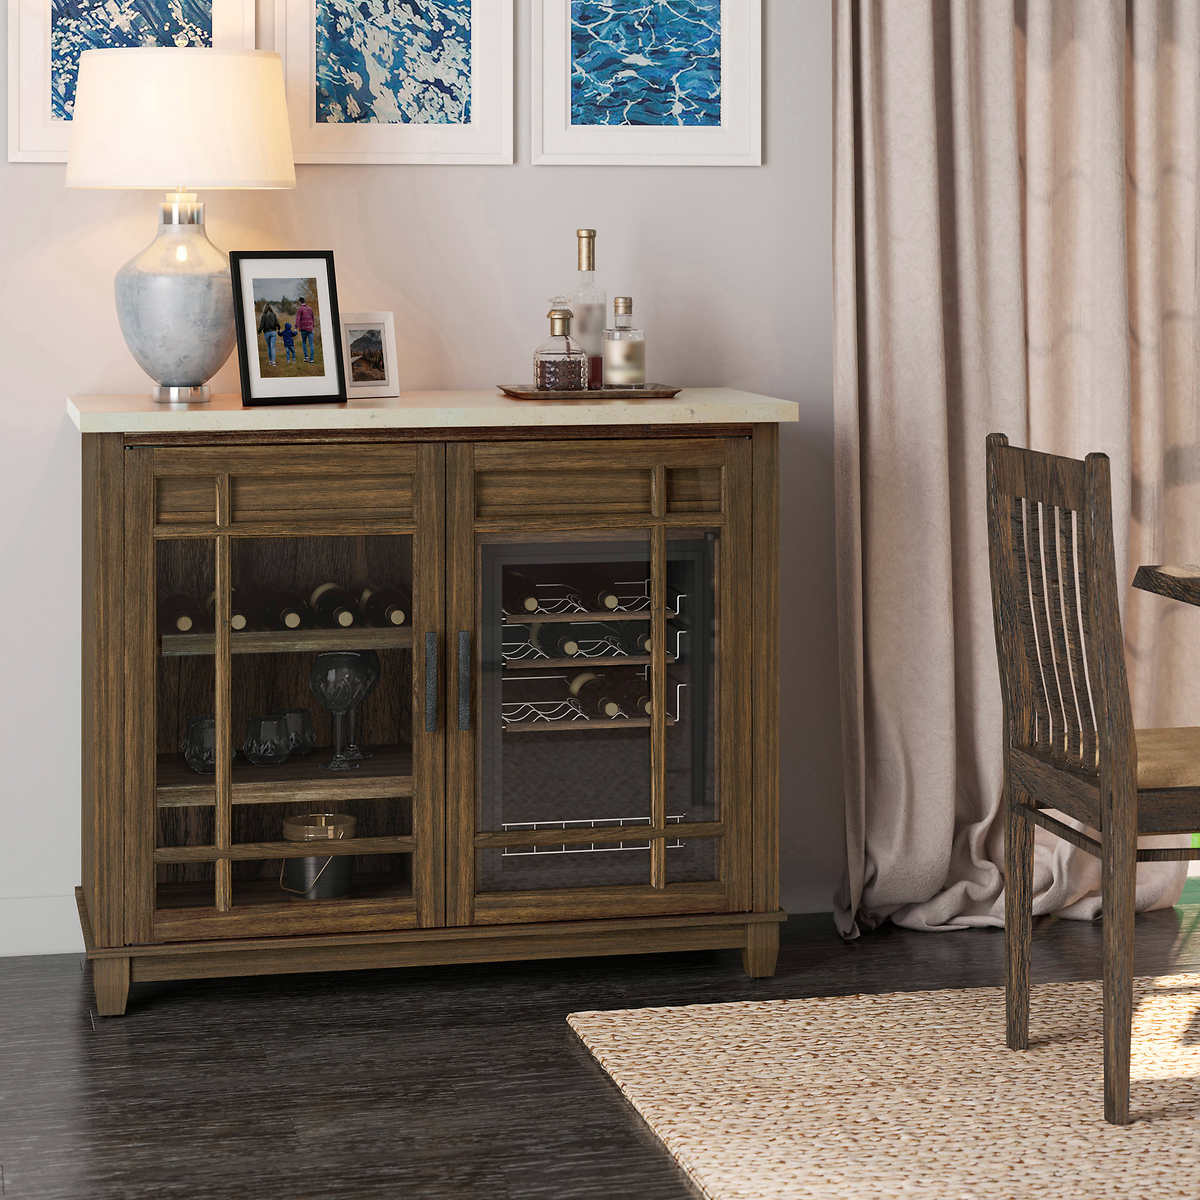 Looking for the perfect addition to your entertainment space? Look no further than the Tresanti Franklin Wine Cabinet with Integrated Cooler. 🎉🍷 Grab yours now at an unbeatable price of $599.99! #entertainingspace #winestorage #homeinterior #partytime